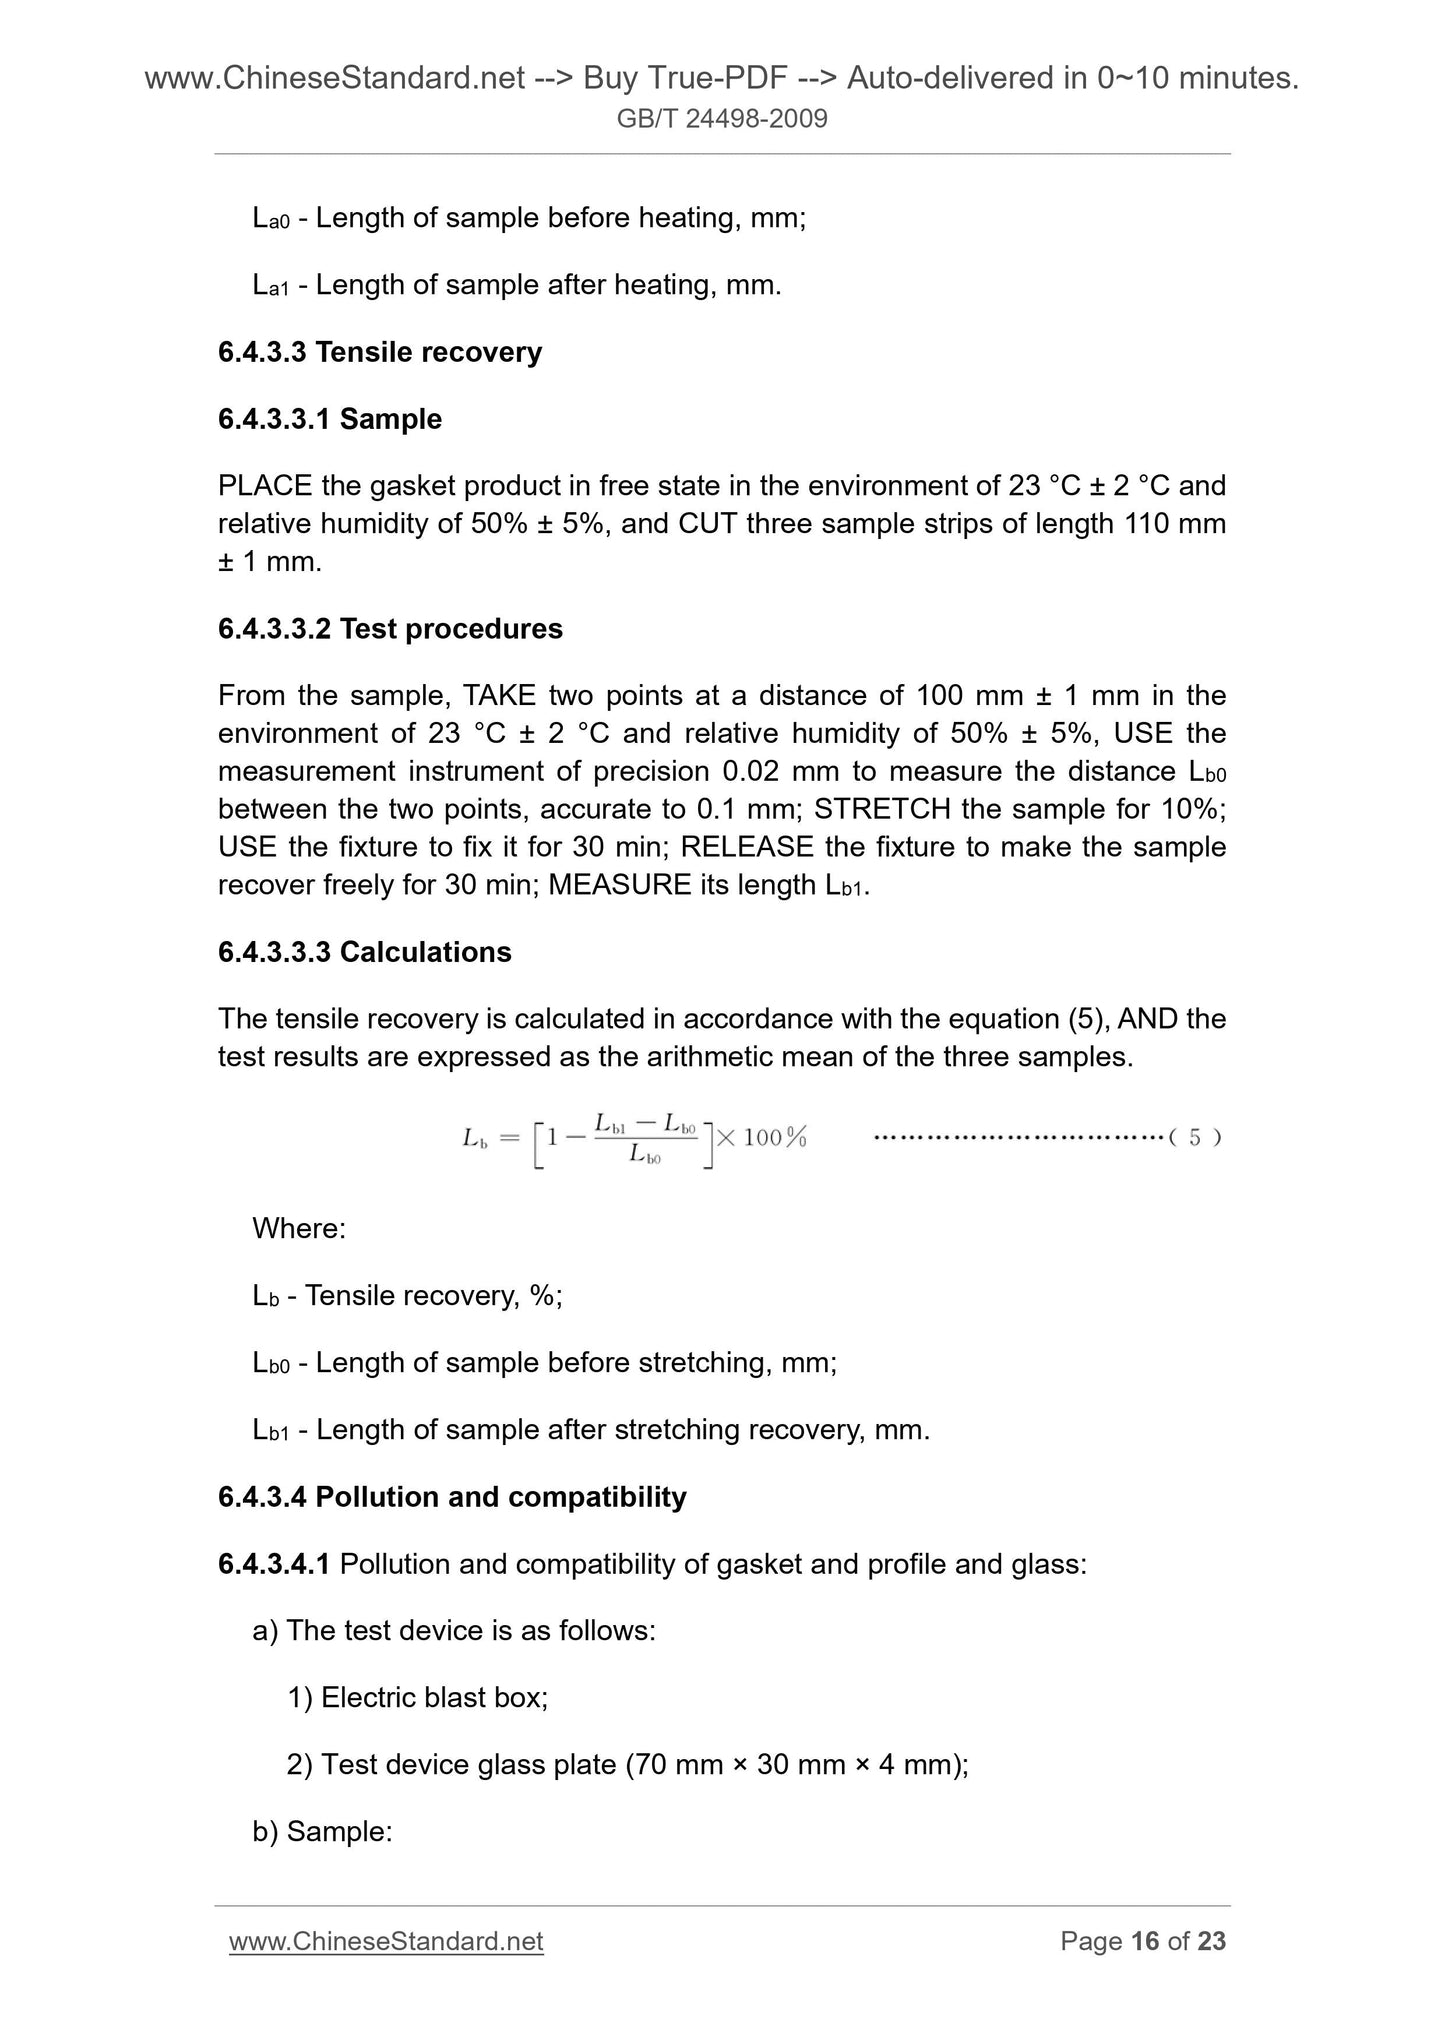 GB/T 24498-2009 Page 10